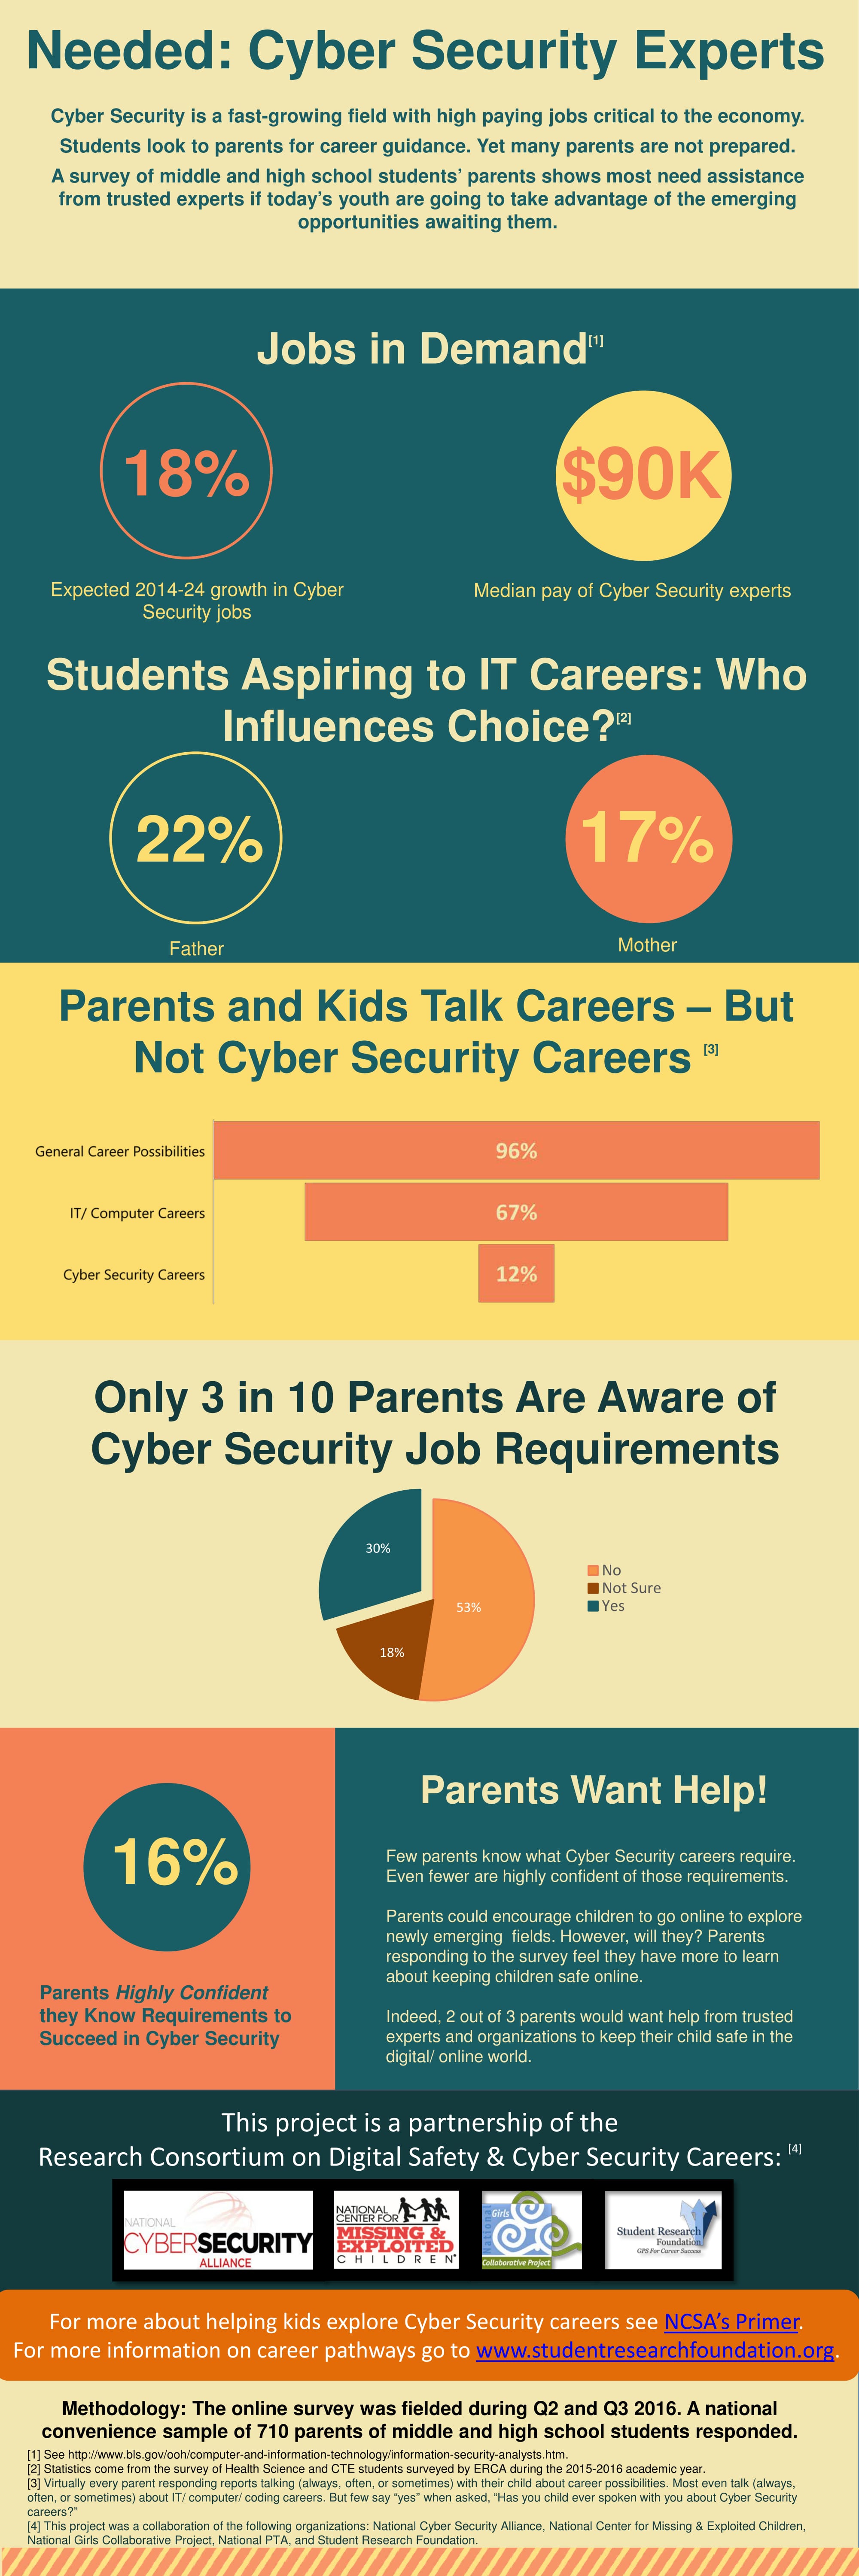 Cyber Security Careers - Infographic from Student Research Foundation 